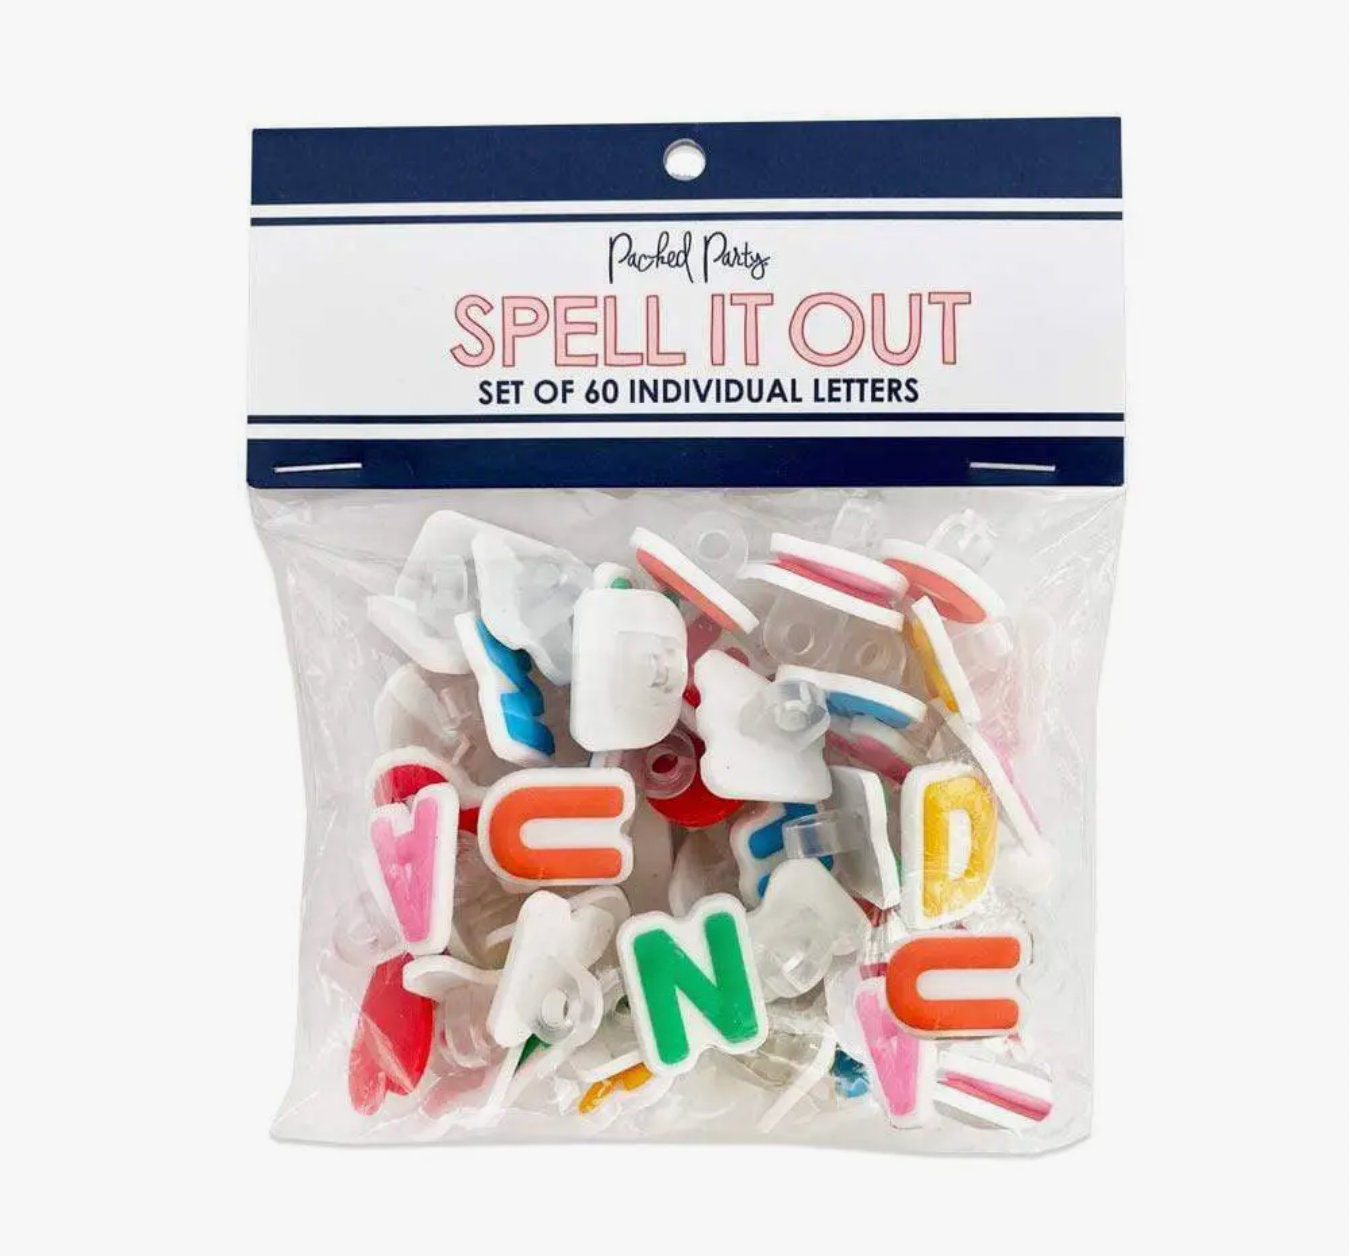 SPELL IT OUT Letter Attachments - Magpies Paducah